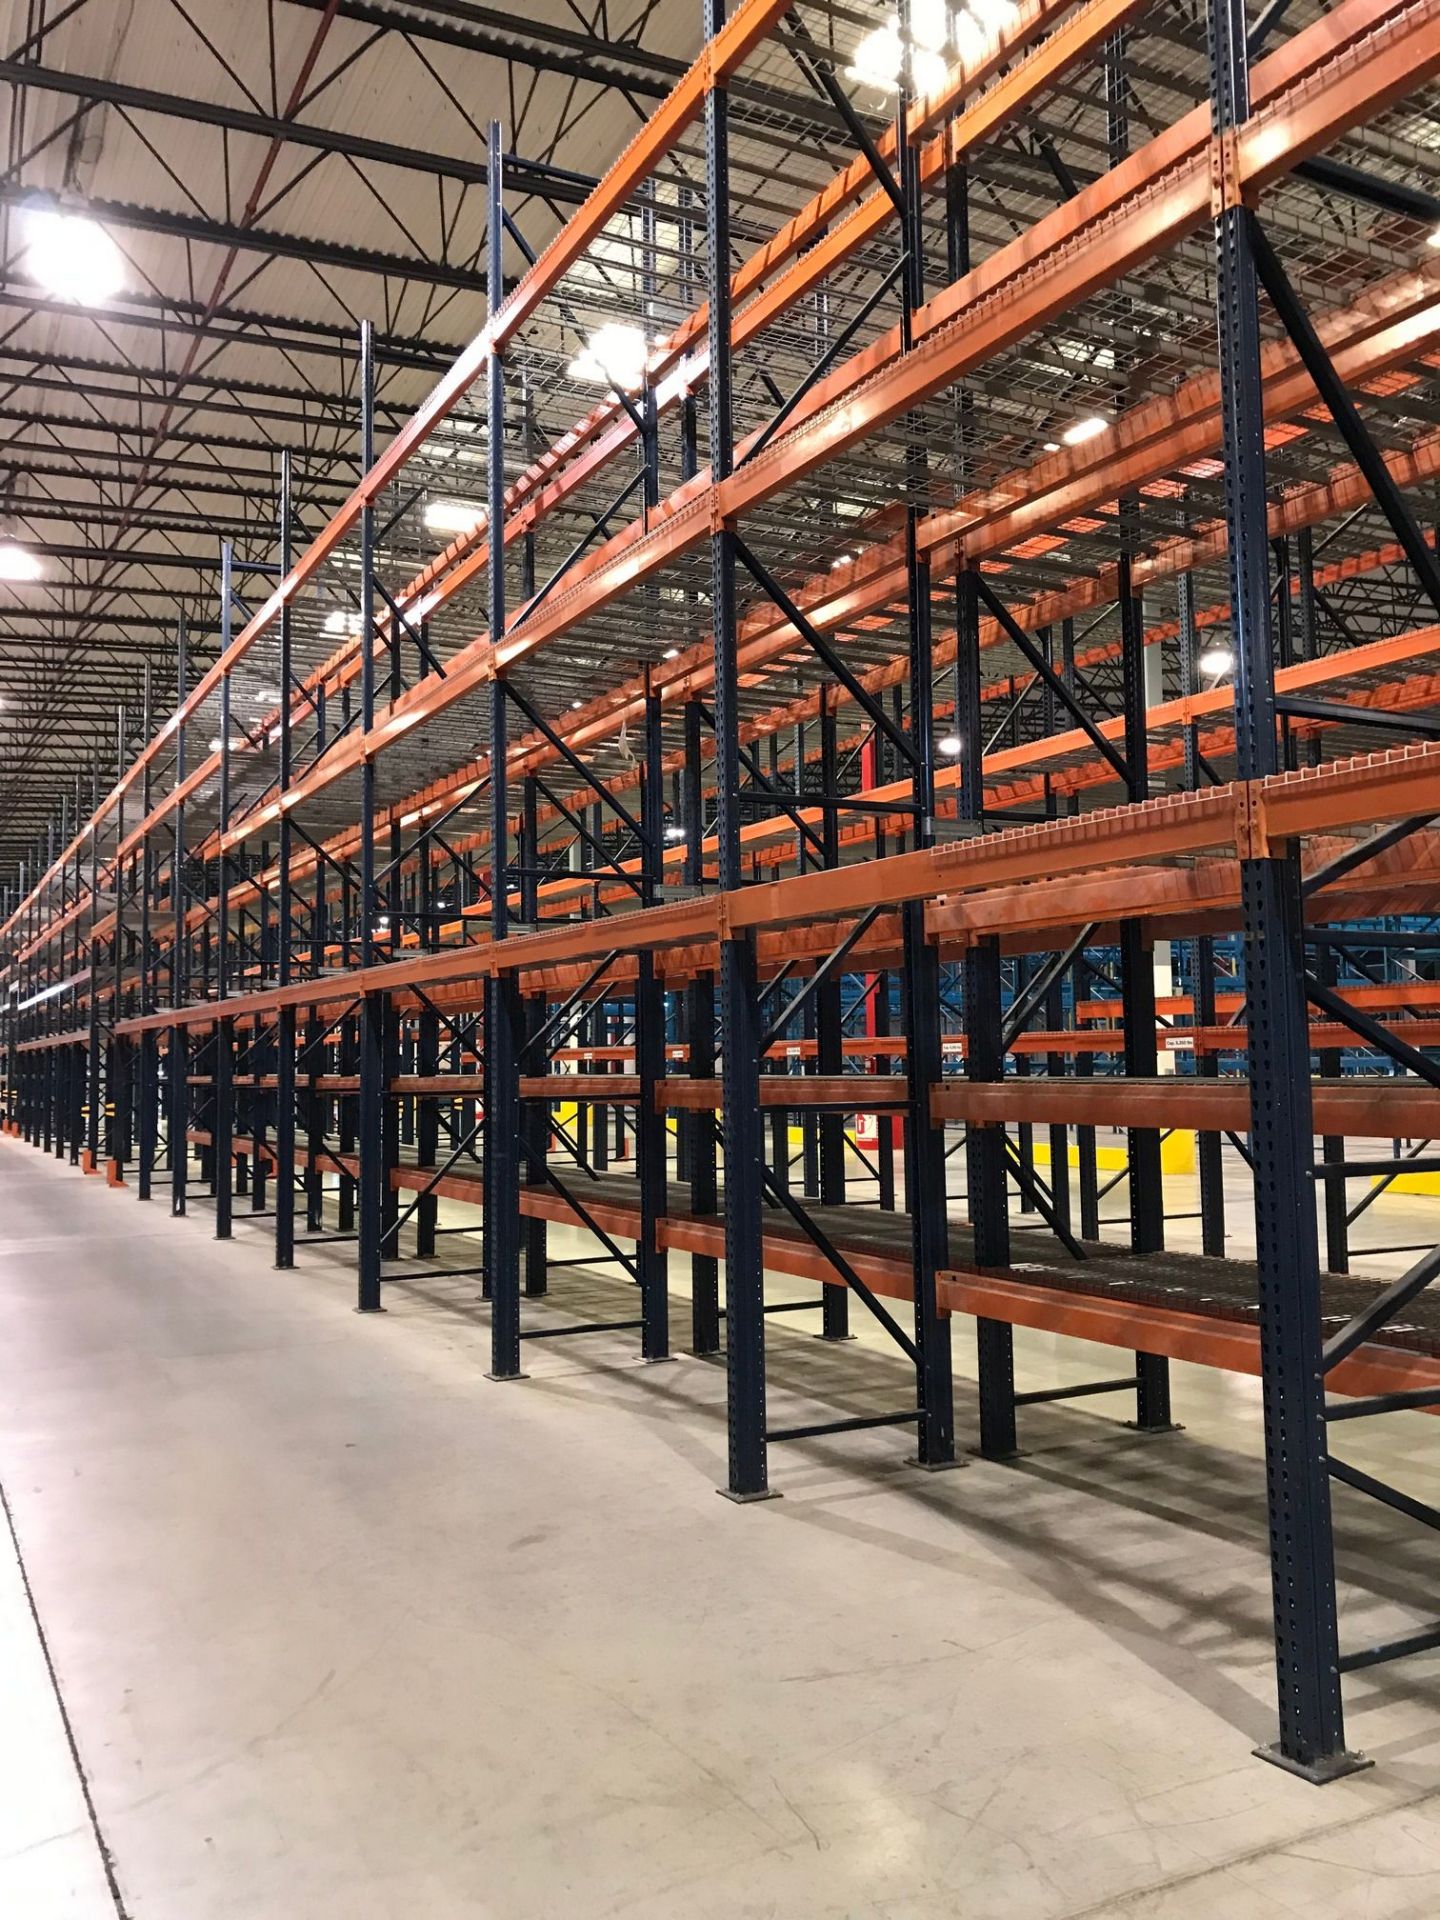 SECTIONS 60" X 108" X 288" TEARDROP TYPE ADJUSTABLE BEAM PALLET RACK WITH WIRE DECKING, 6" HIGH - Image 3 of 14